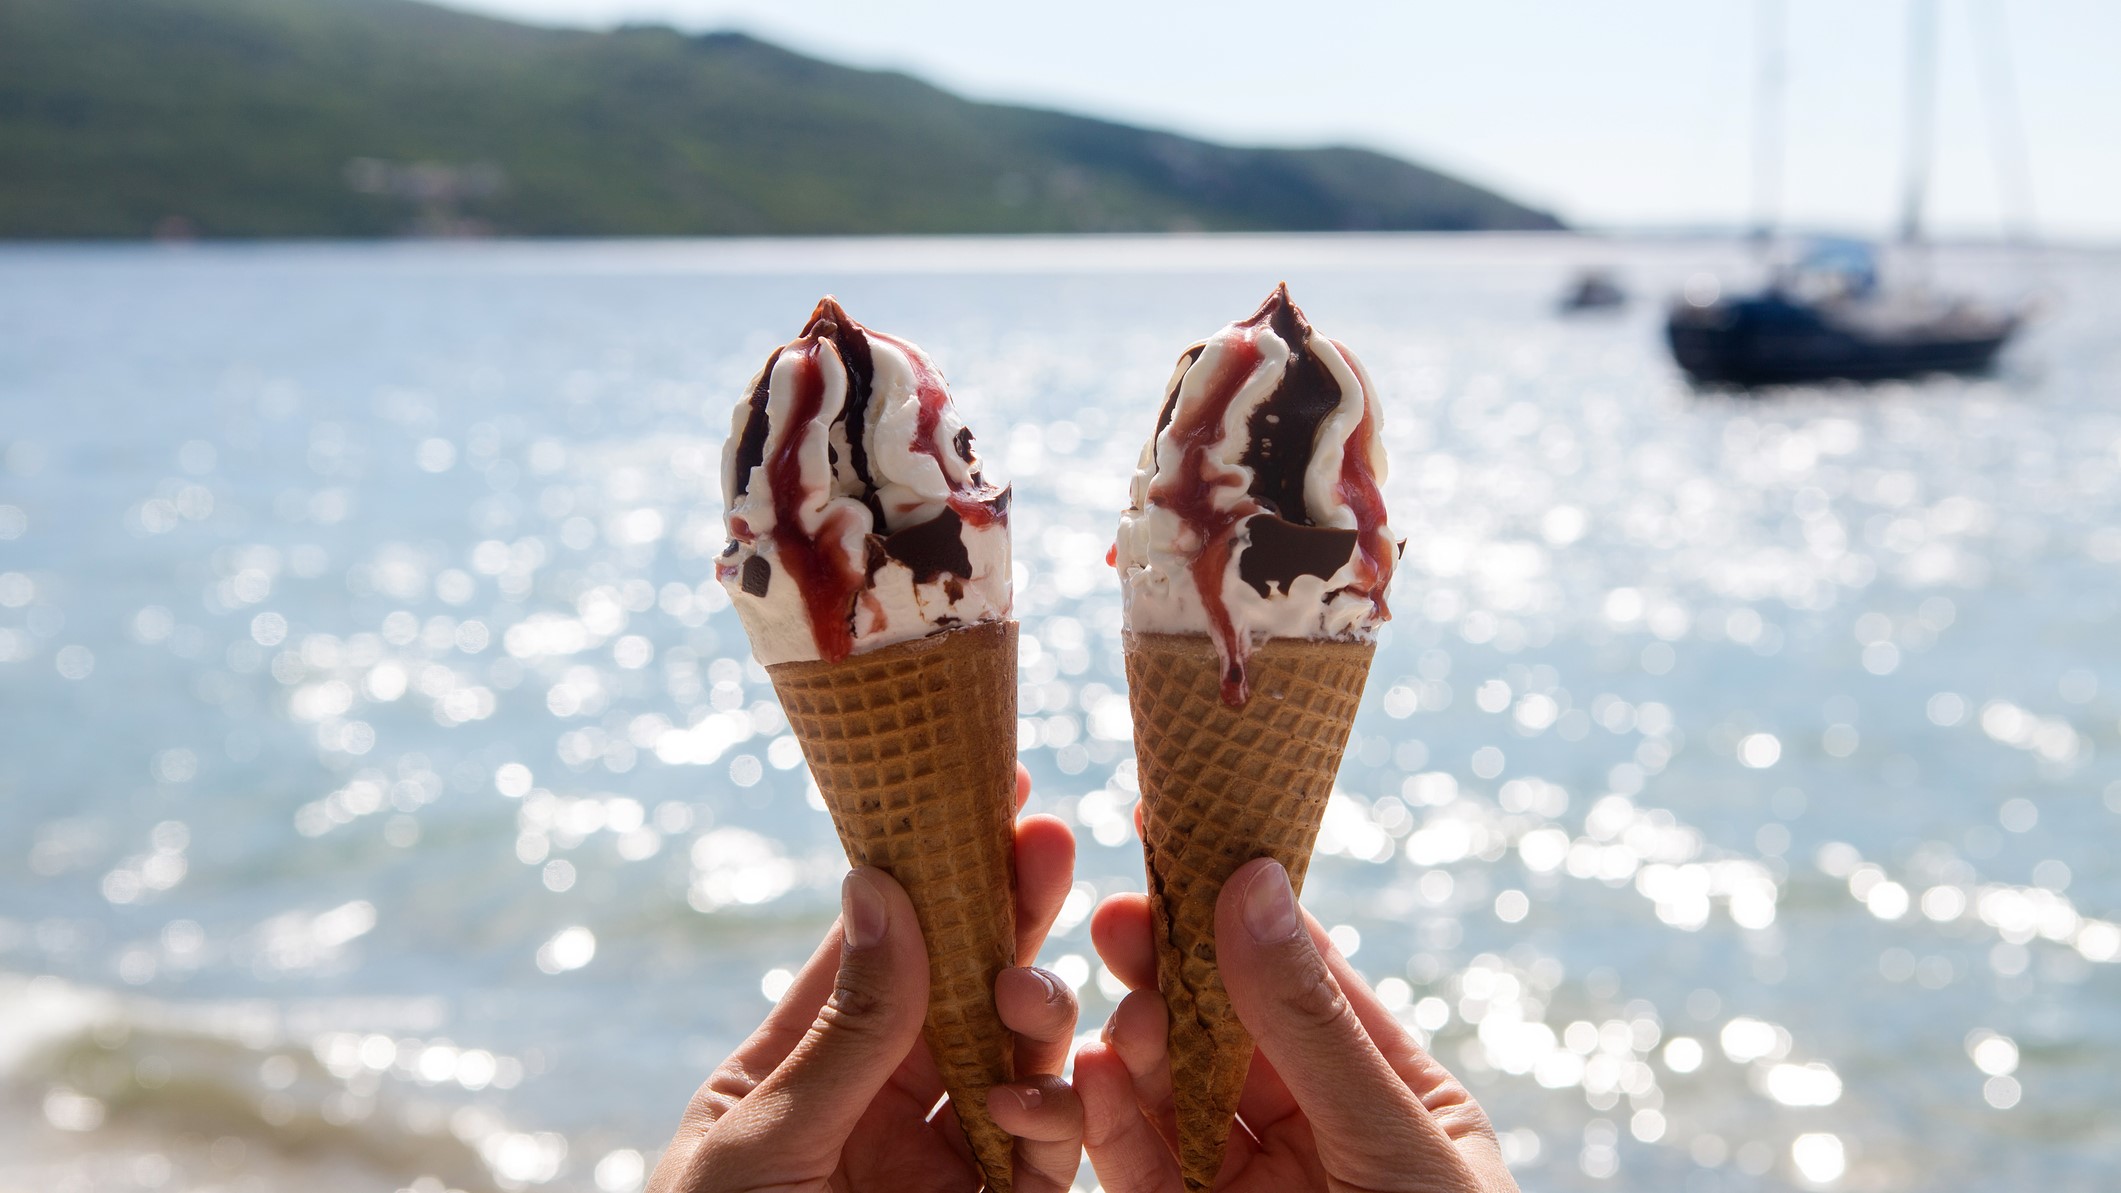 hands holding ice cream cones near a body of water